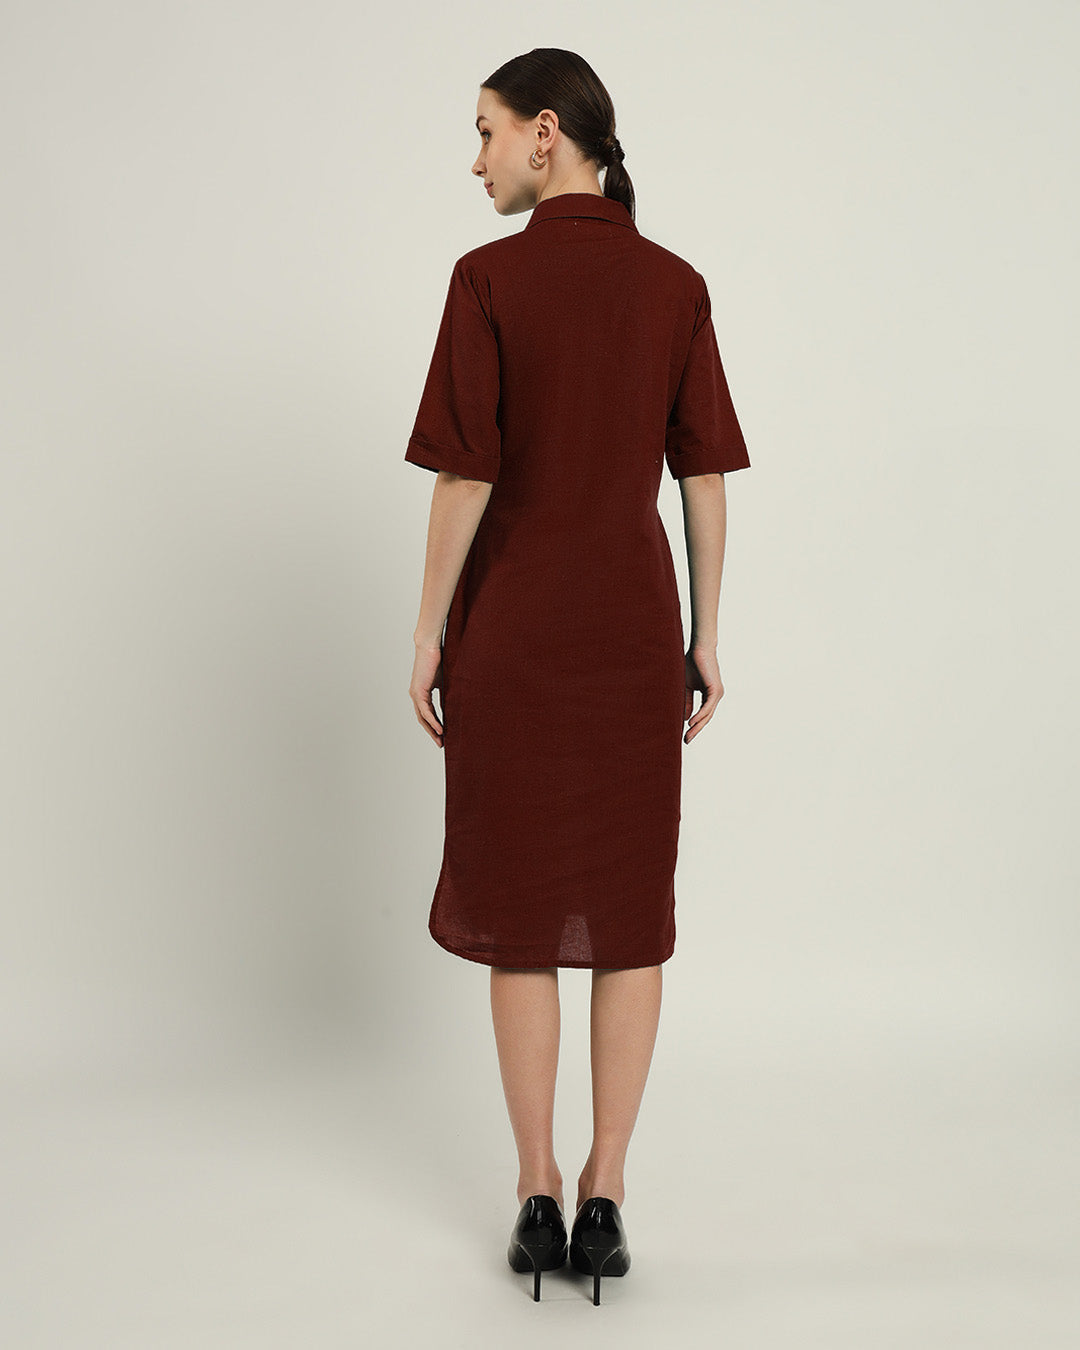 The Tampa Rouge Dress